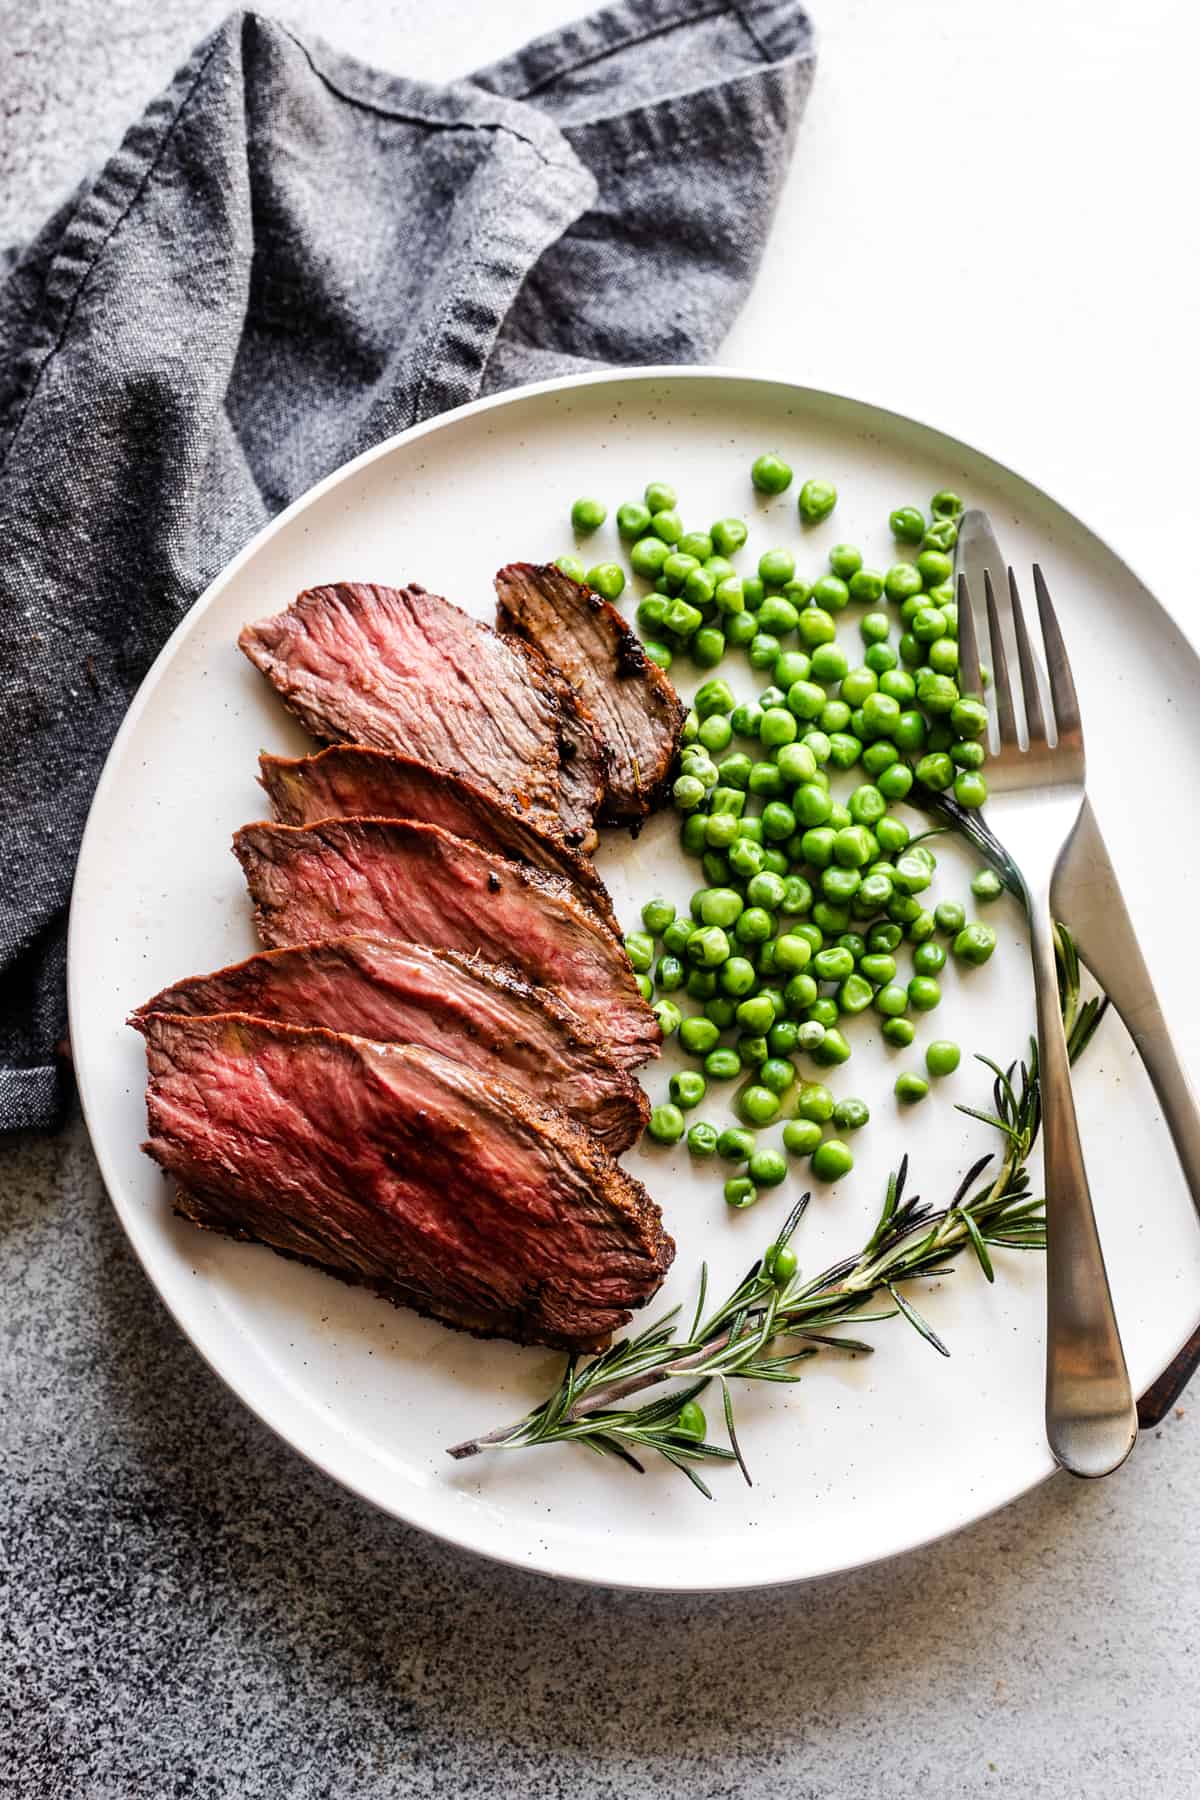 slices of beef tri tip arranged on a plate with green peas and a rosemary branch served next to it.